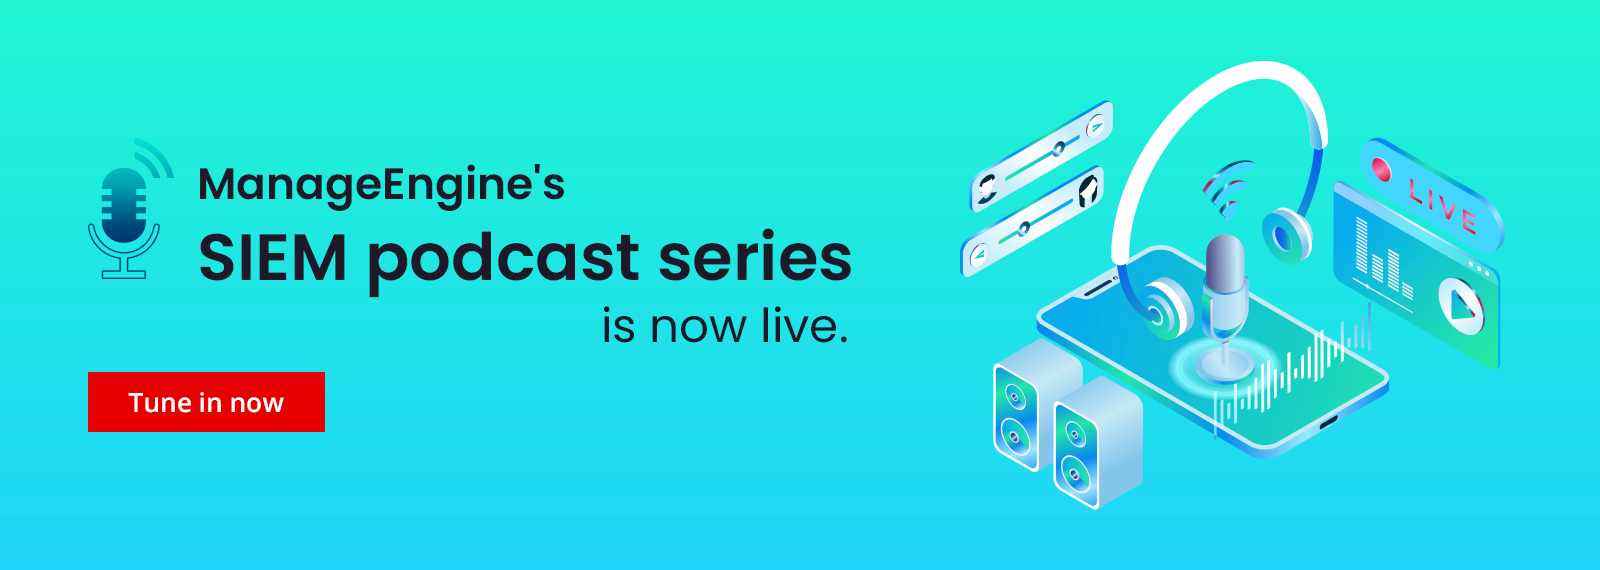 Our Siem Podcast Series Is Now Live Tune In Now Manageengine Blog